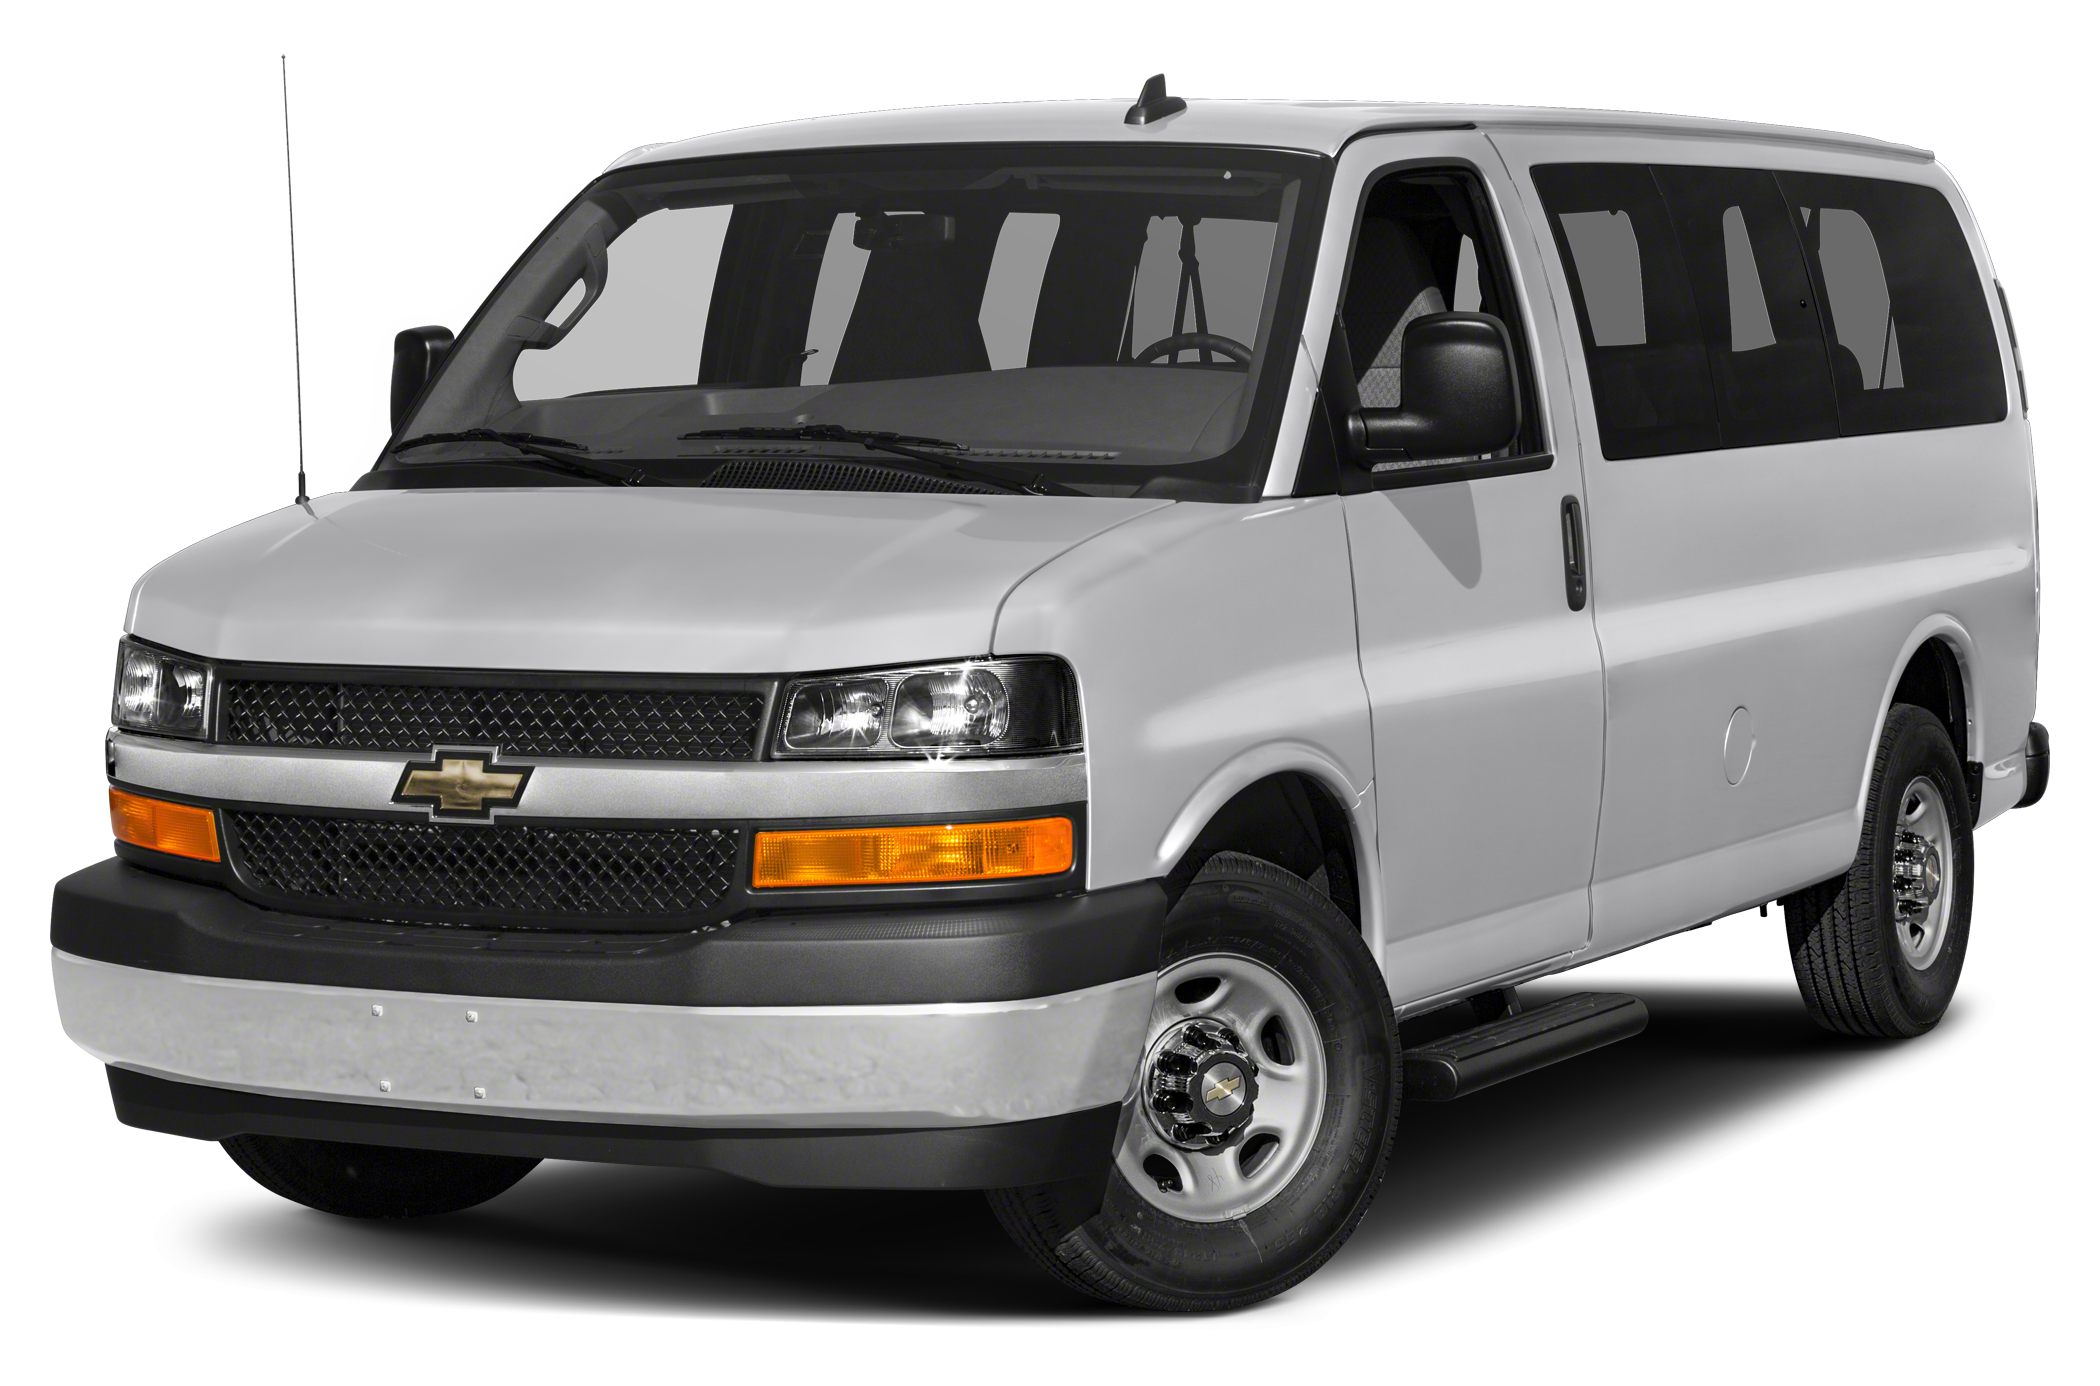 2016 Chevrolet Express 3500 Specs and 